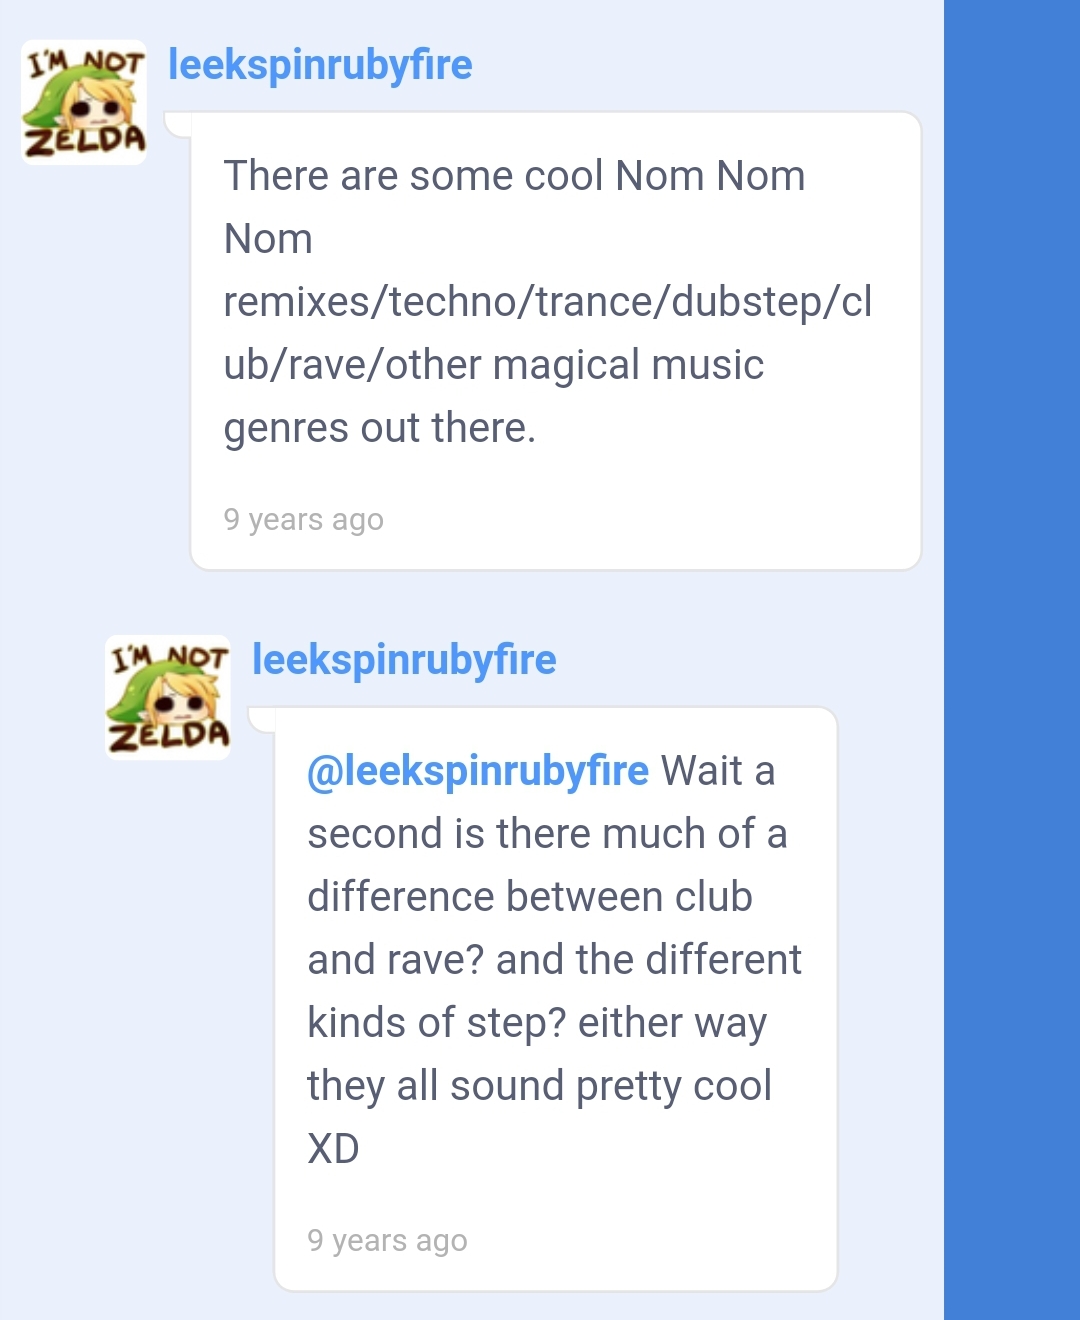 A screenshot of my comments on something 9 years ago as of 2021. I say, 'There are some cool Nom Nom Nom remixes / techno / trance / dubstep / club / rave / other magical music genres out there [...] Wait a second, is there much of a difference between club and rave? And the different kinds of step? Either way, they all sound pretty cool XD'